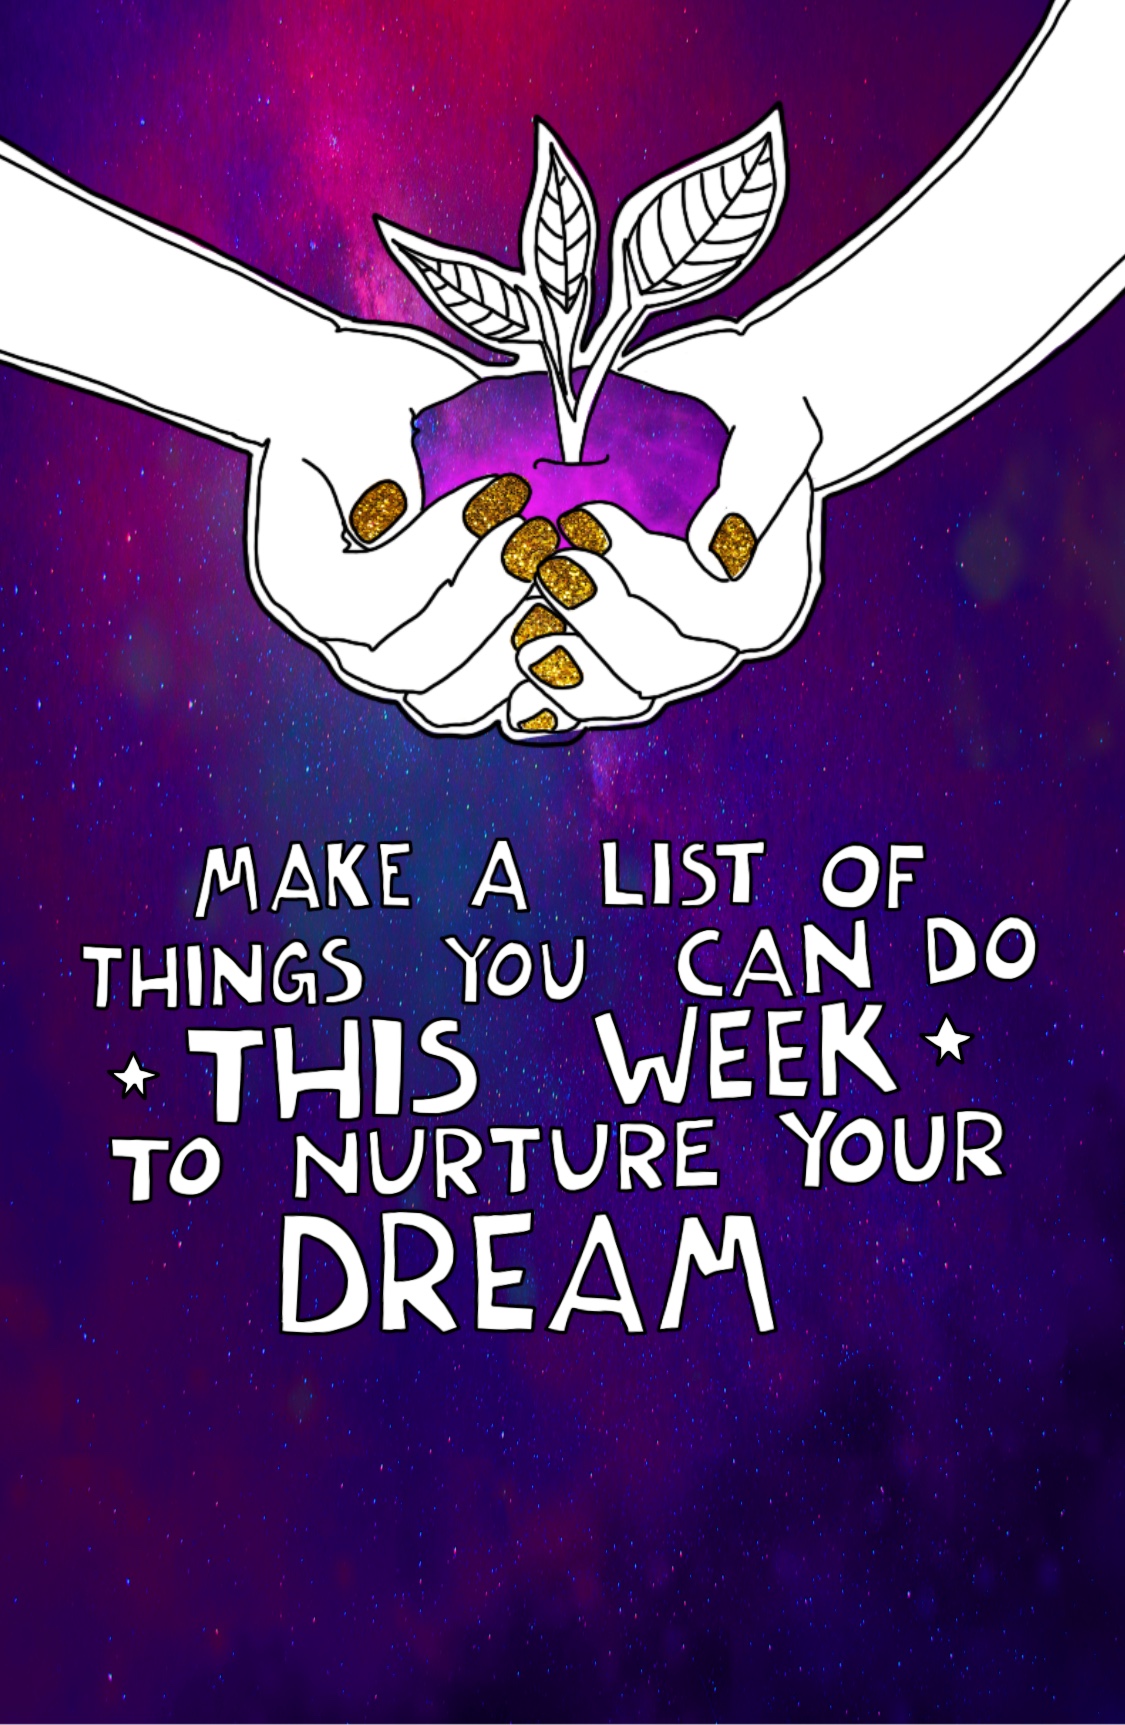 Journal Prompt: Make a list of things you can do *this week* to nurture your dream